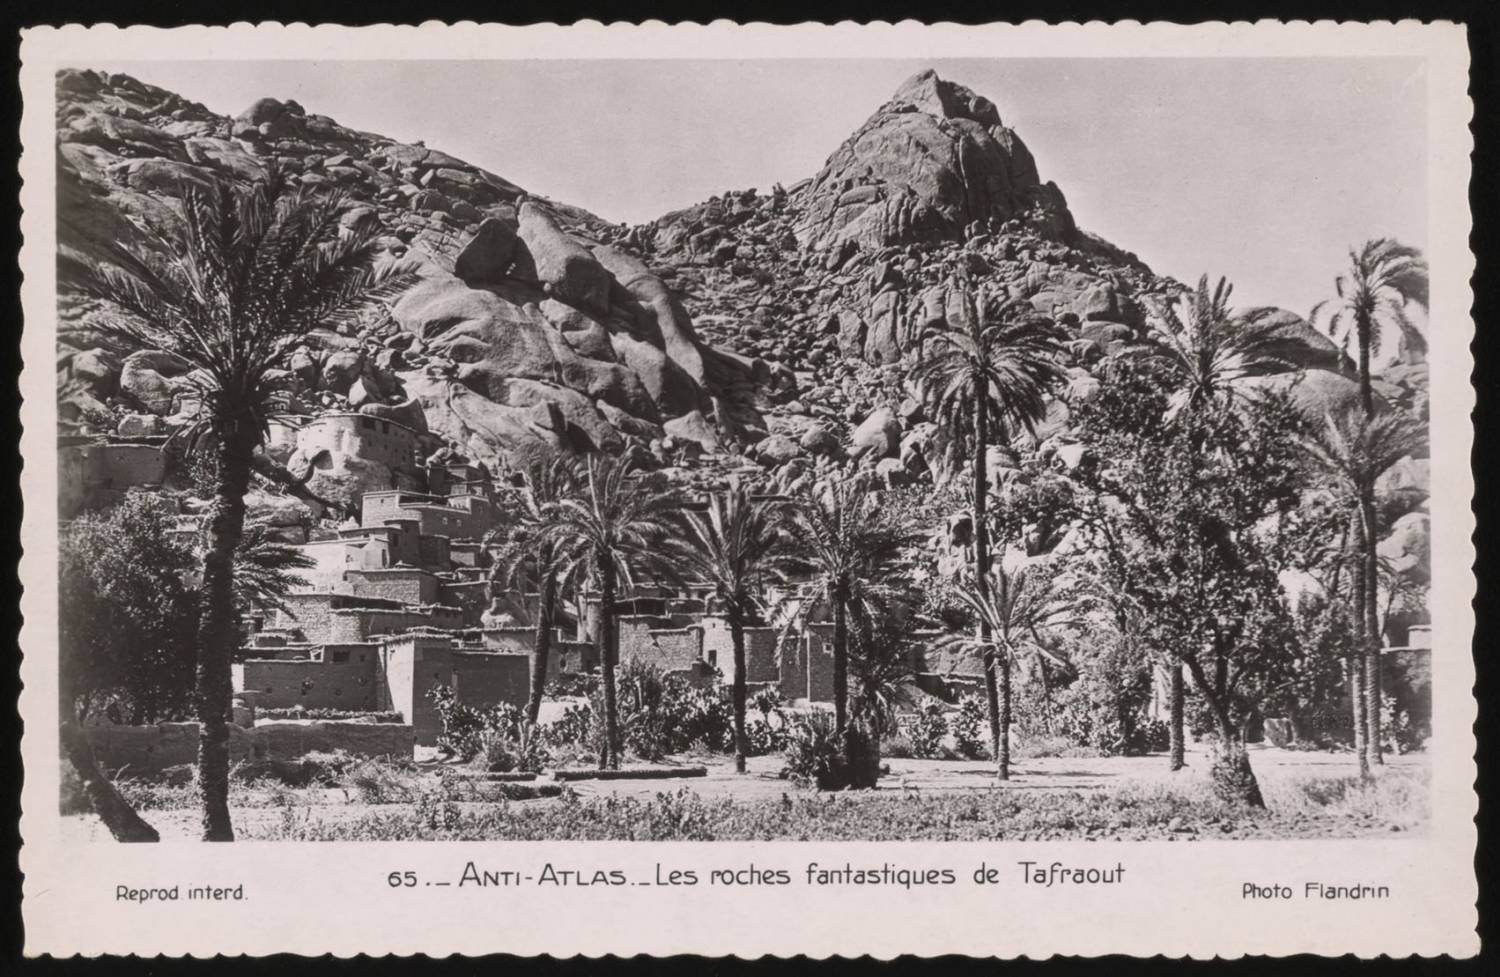 General view of the Tafraout Rocks